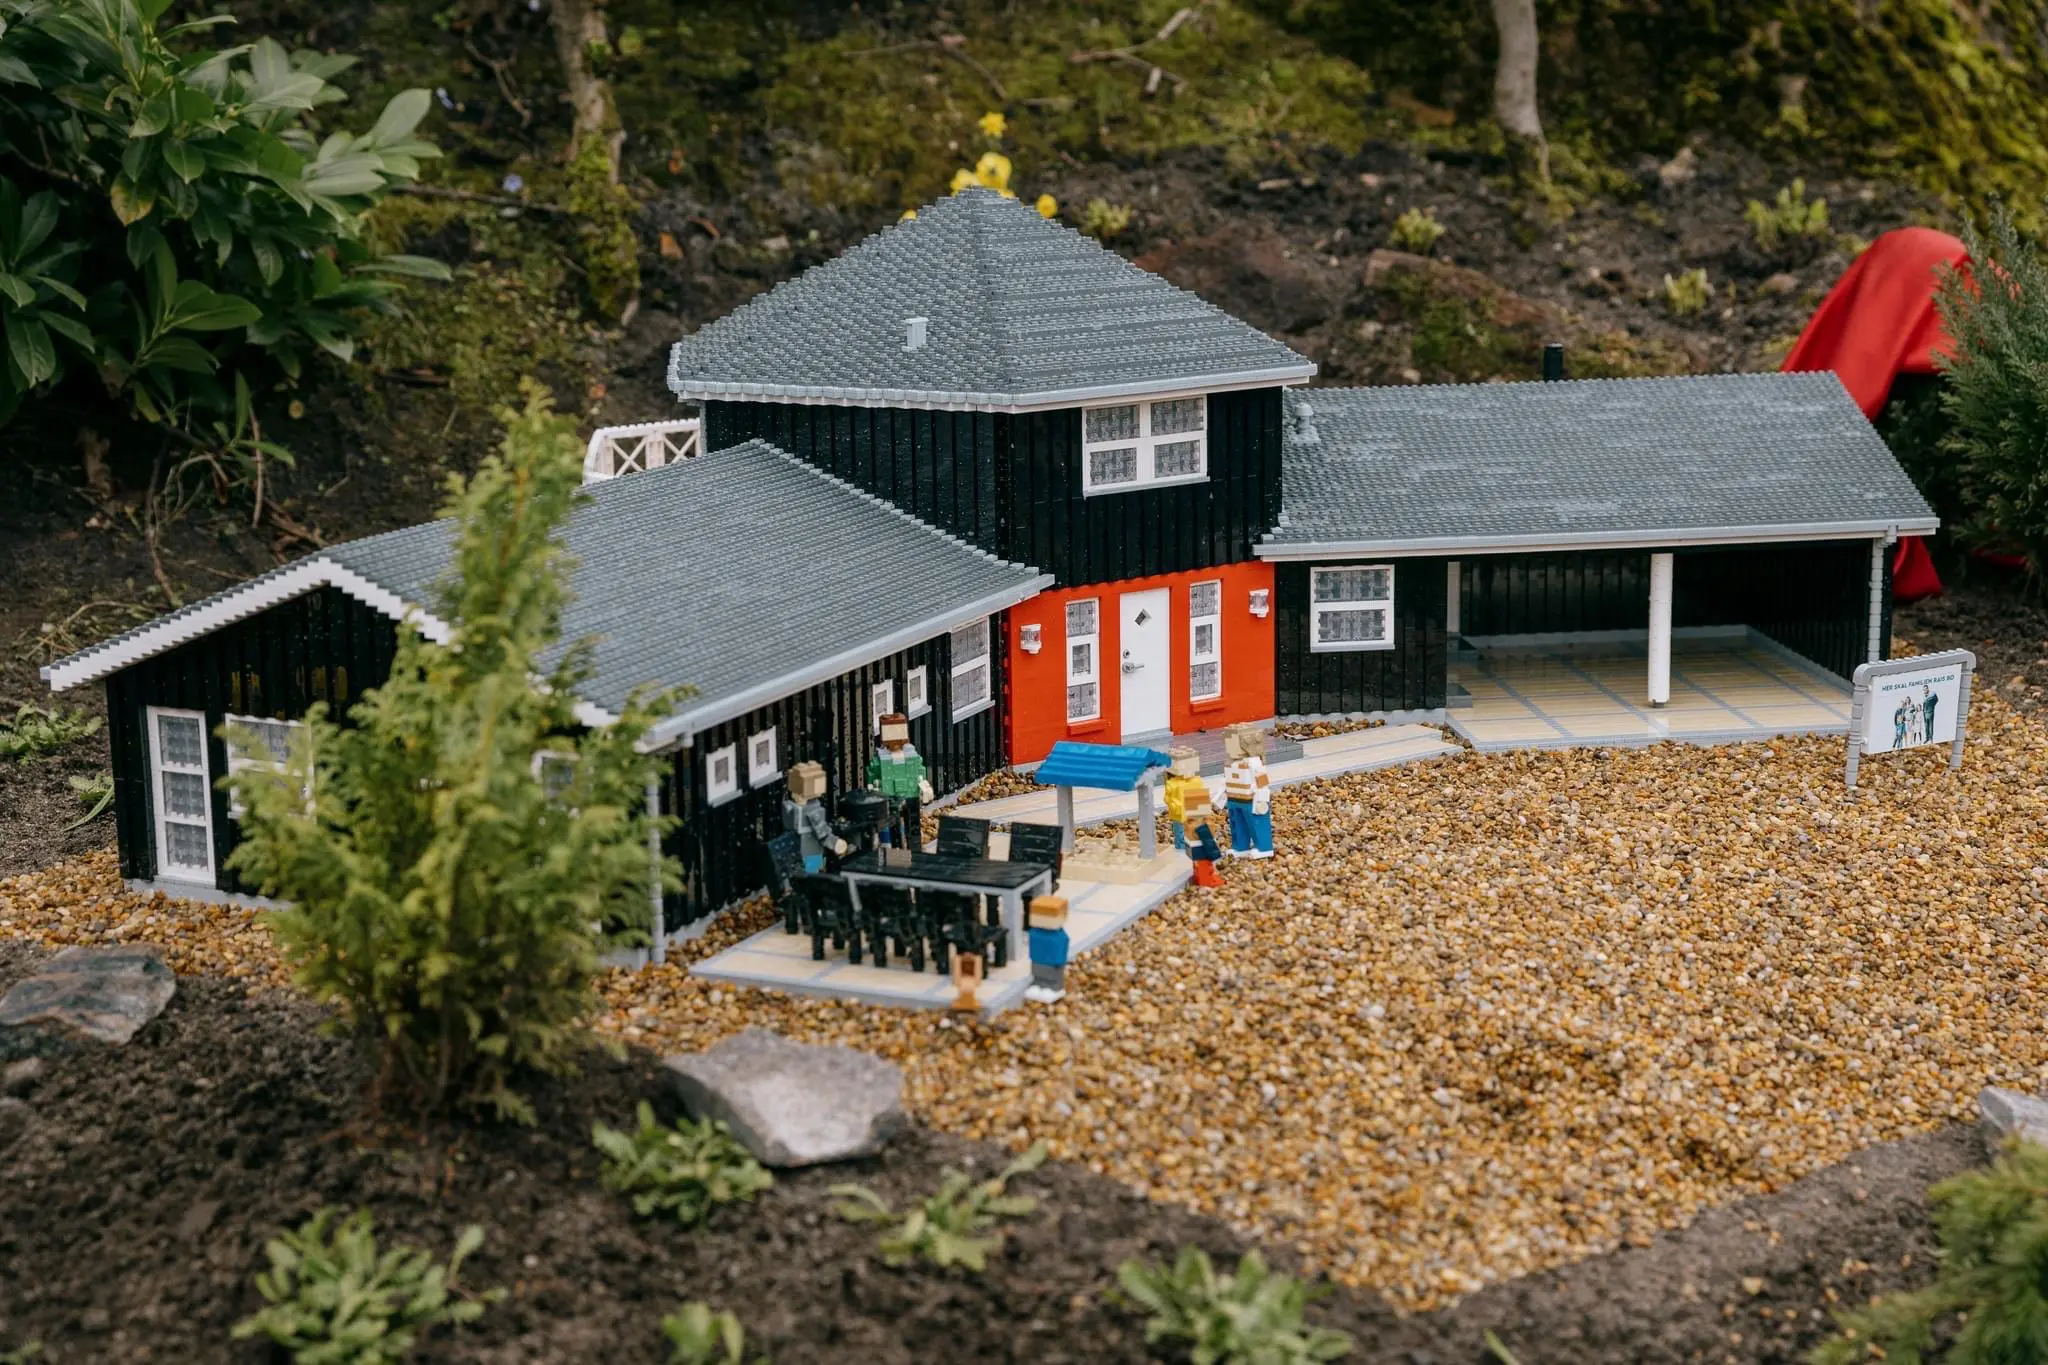 Family wins a LEGO version of their house with a view in LEGOLAND